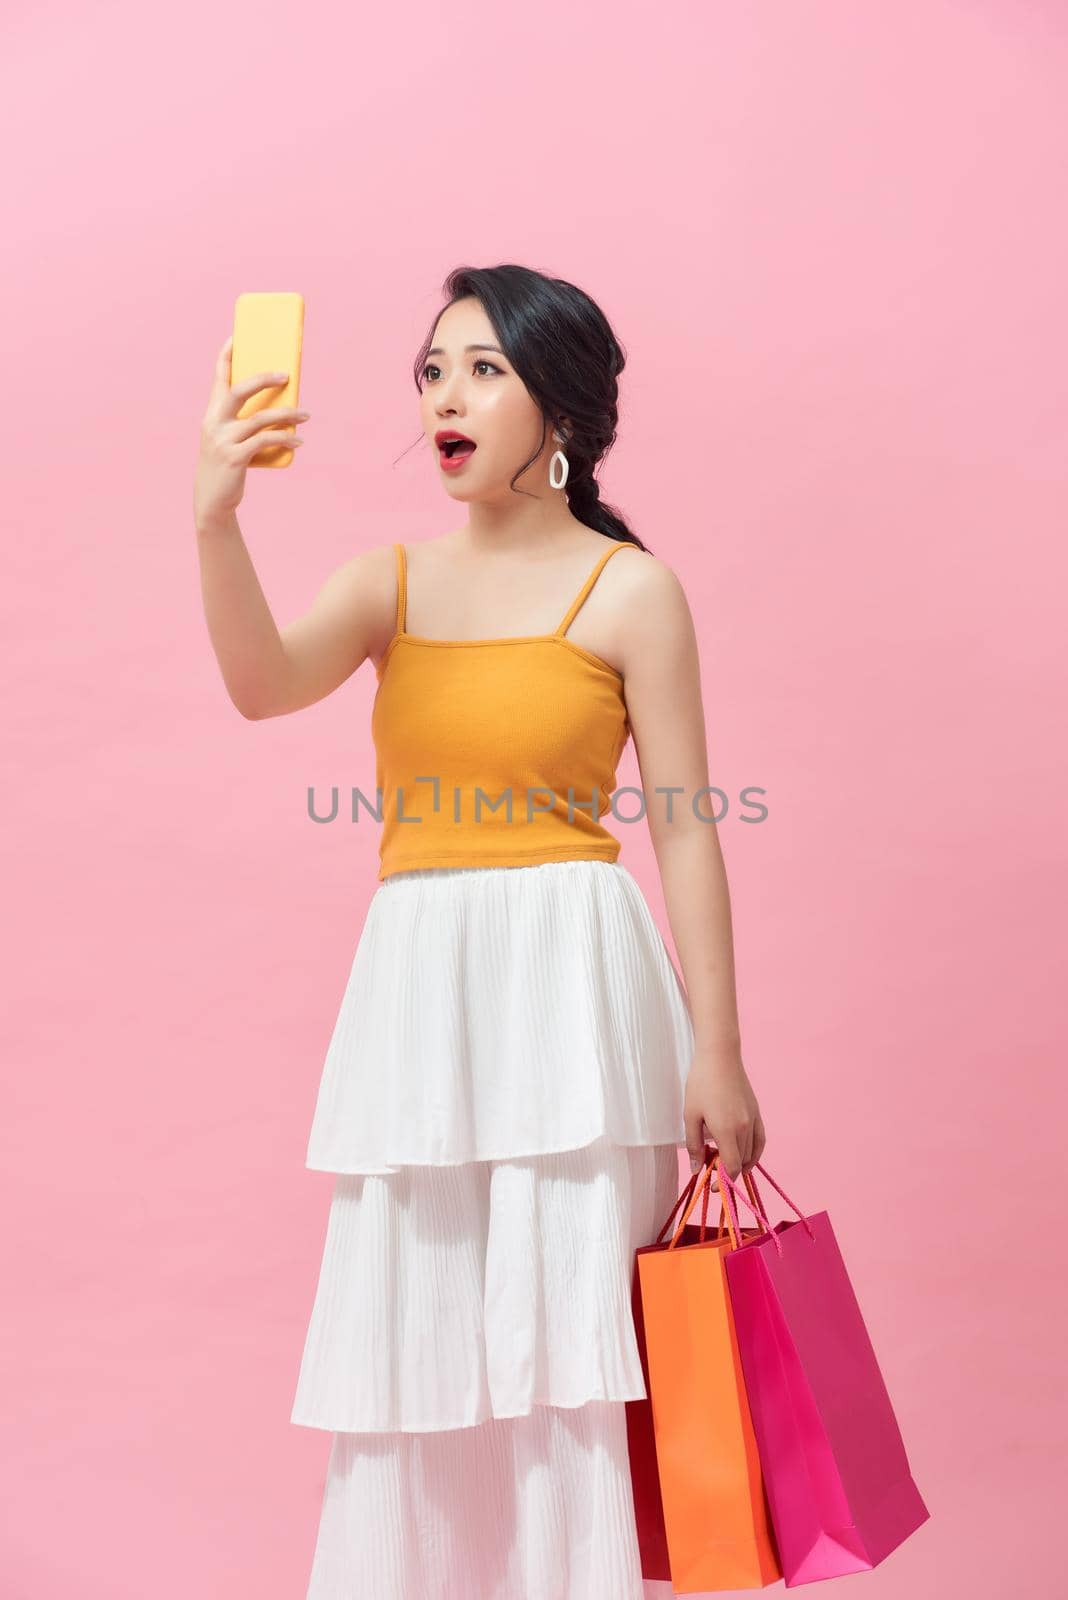 Surprised young woman with mobile phone and shopping bags on color background